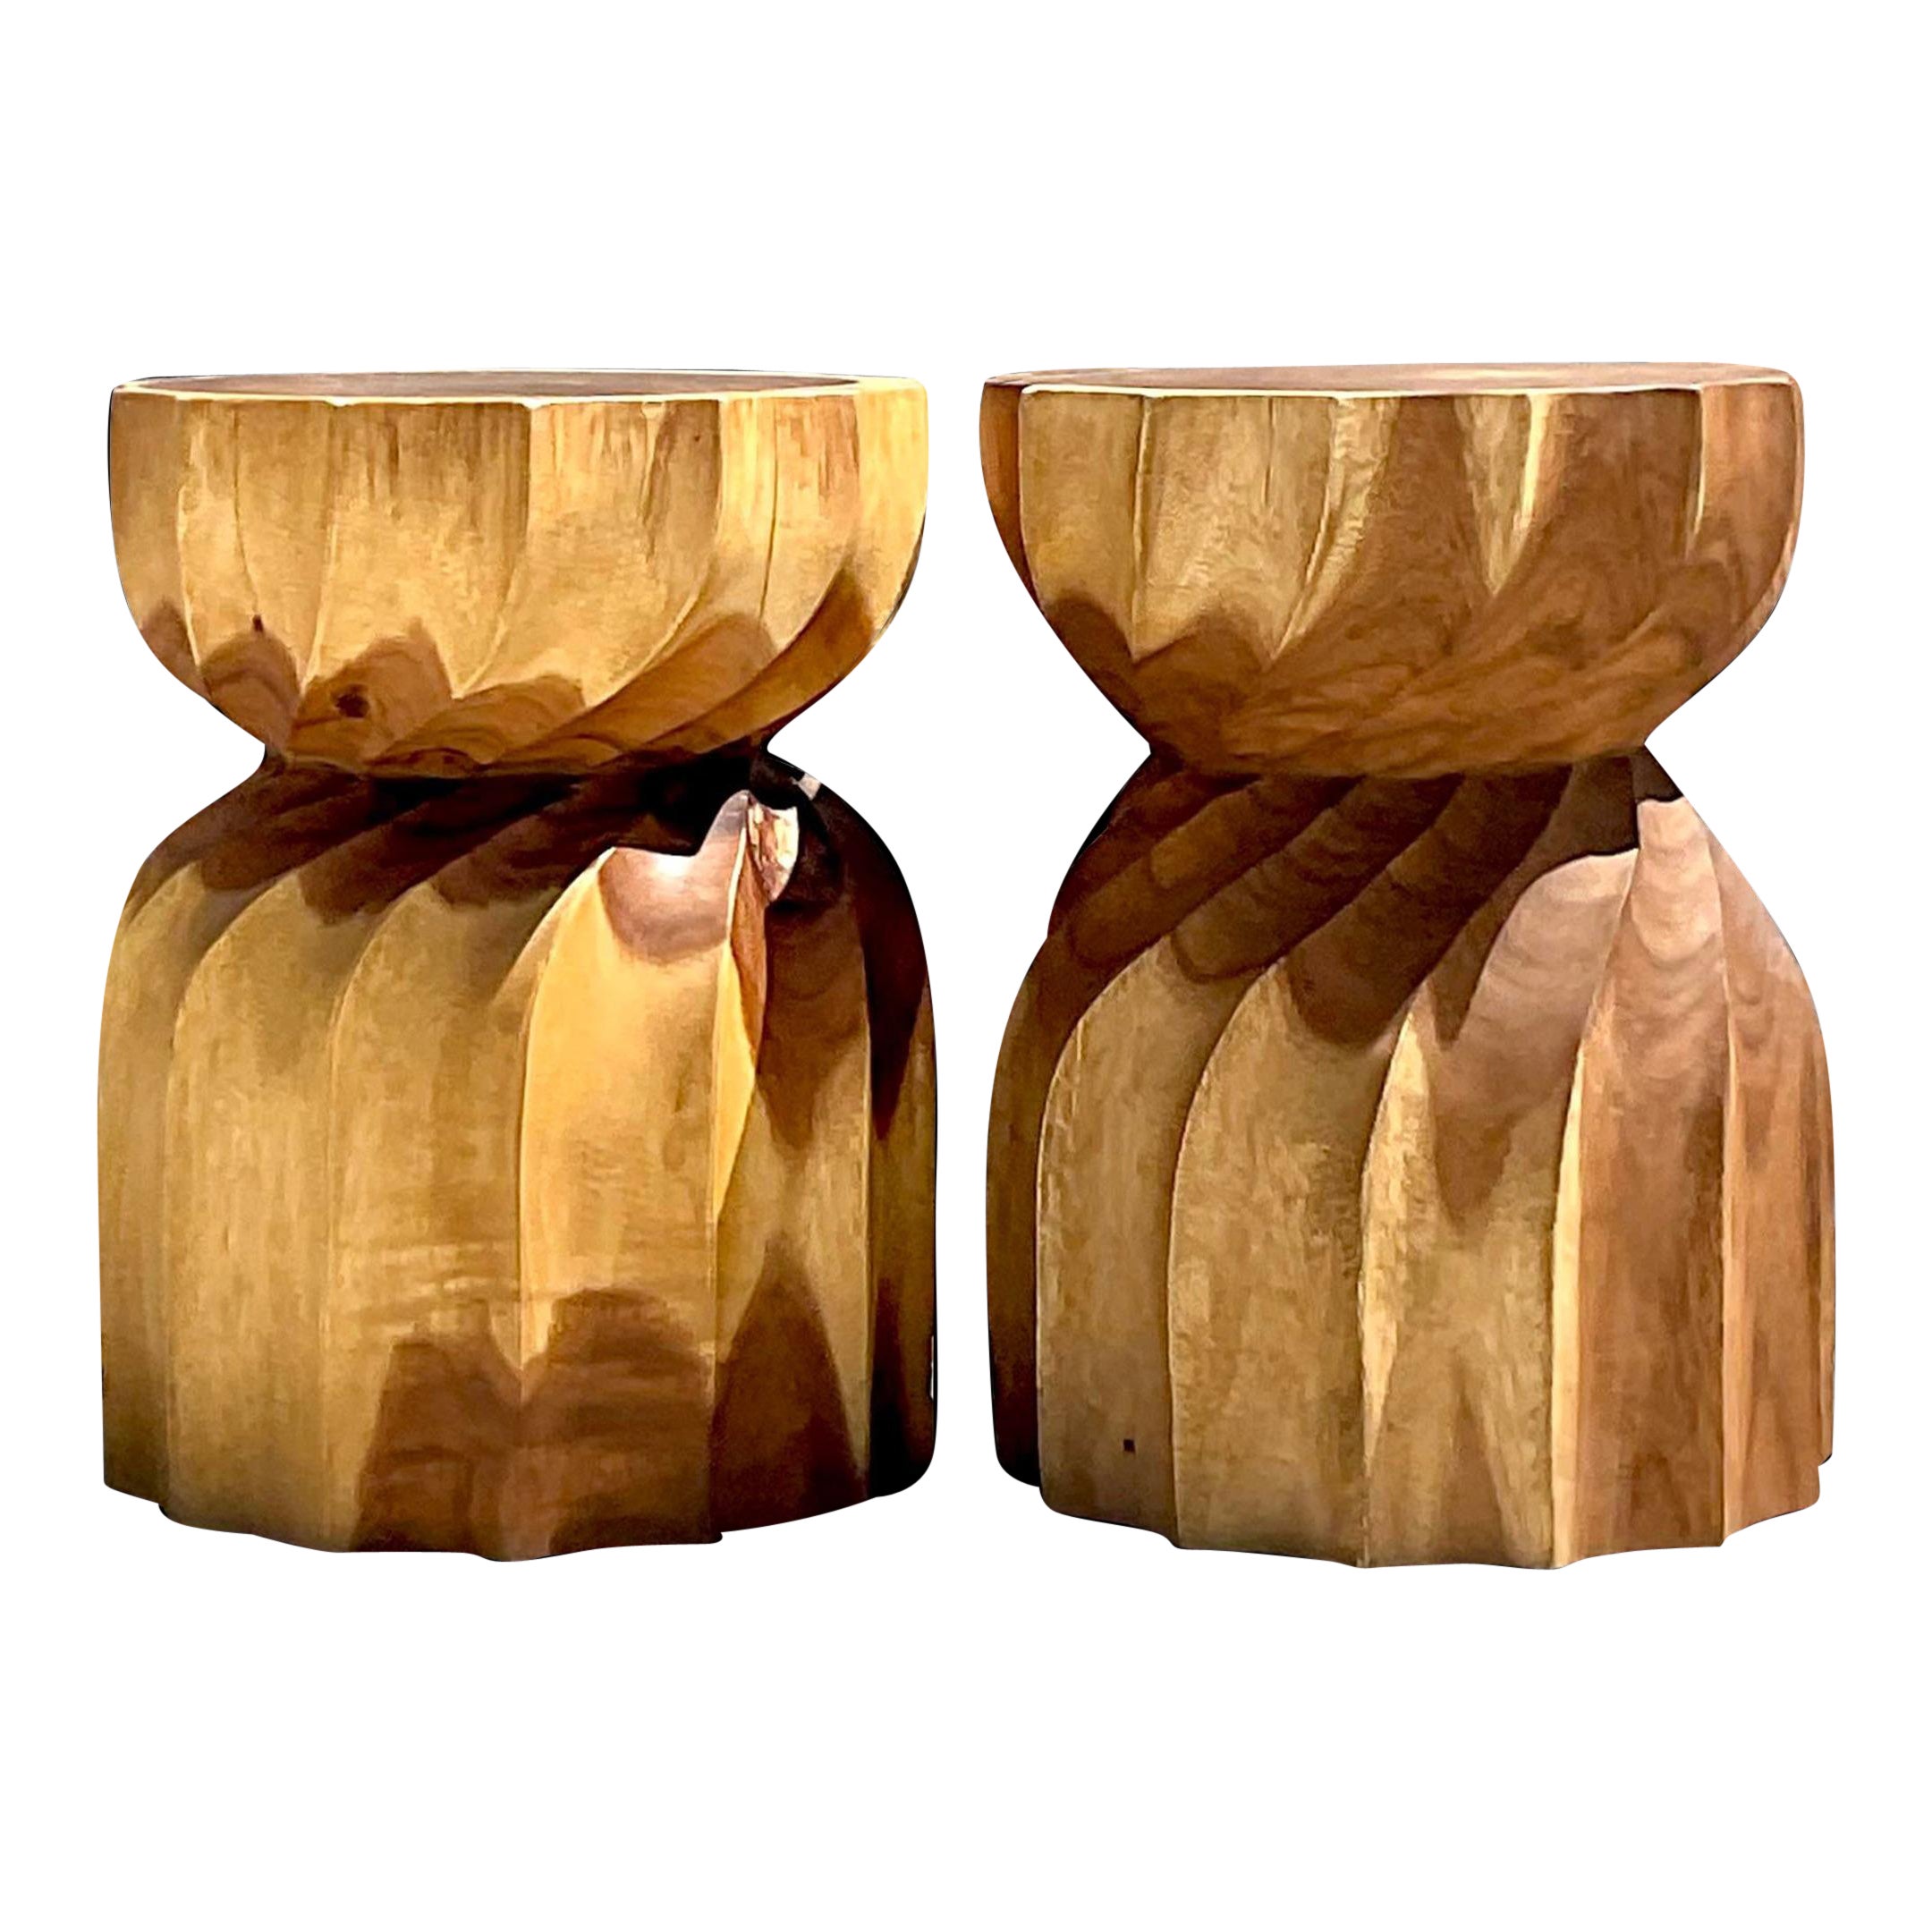 Vintage Boho Twisted Stump Low Stools - a Pair For Sale